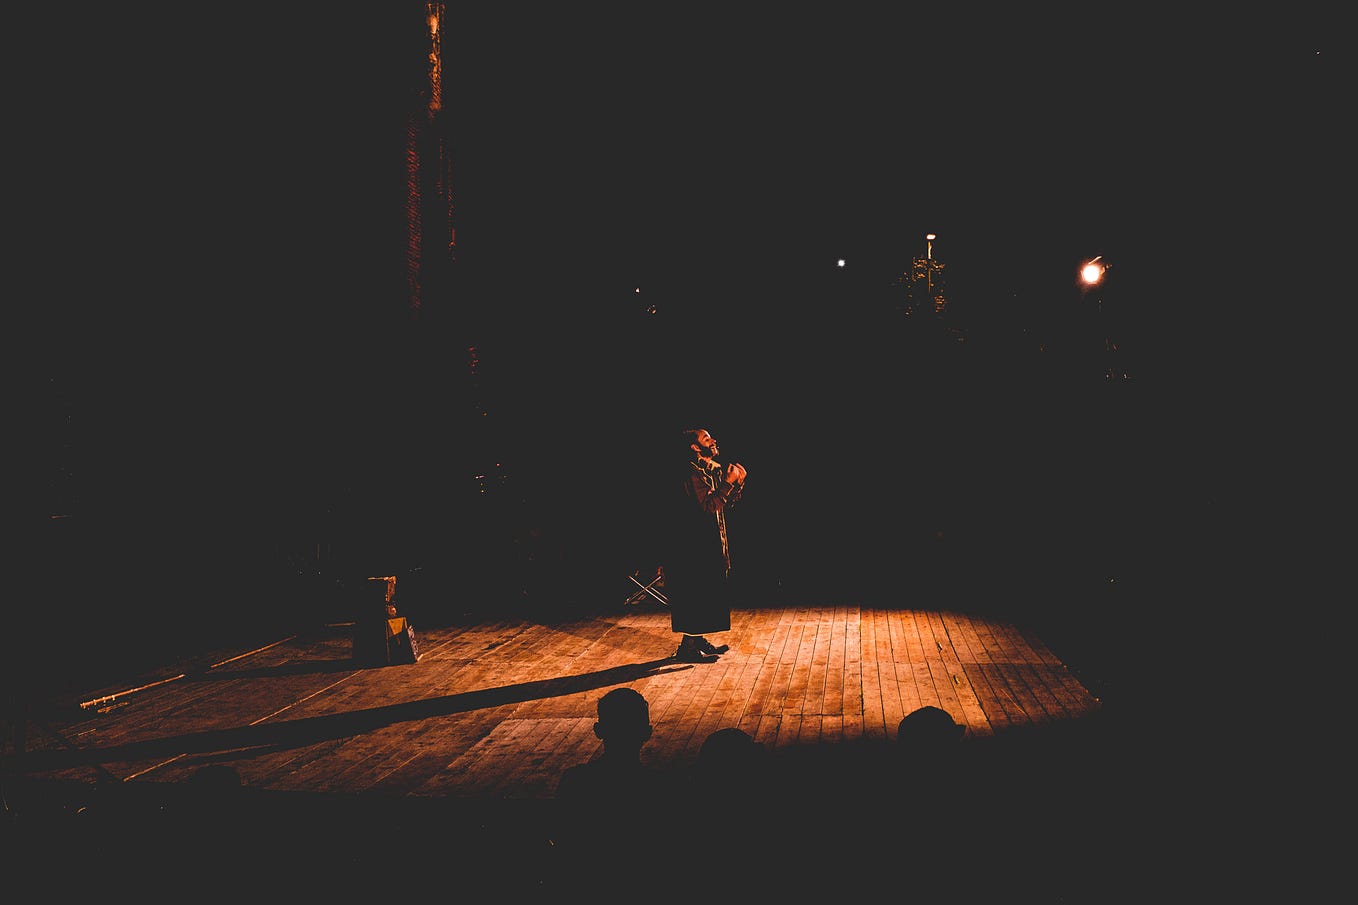 An image of an actor in the centre of a spotlighted stage. The floor is wooden, and the rest of the scene is very dark apart from a few heads of an audience in the foreground.